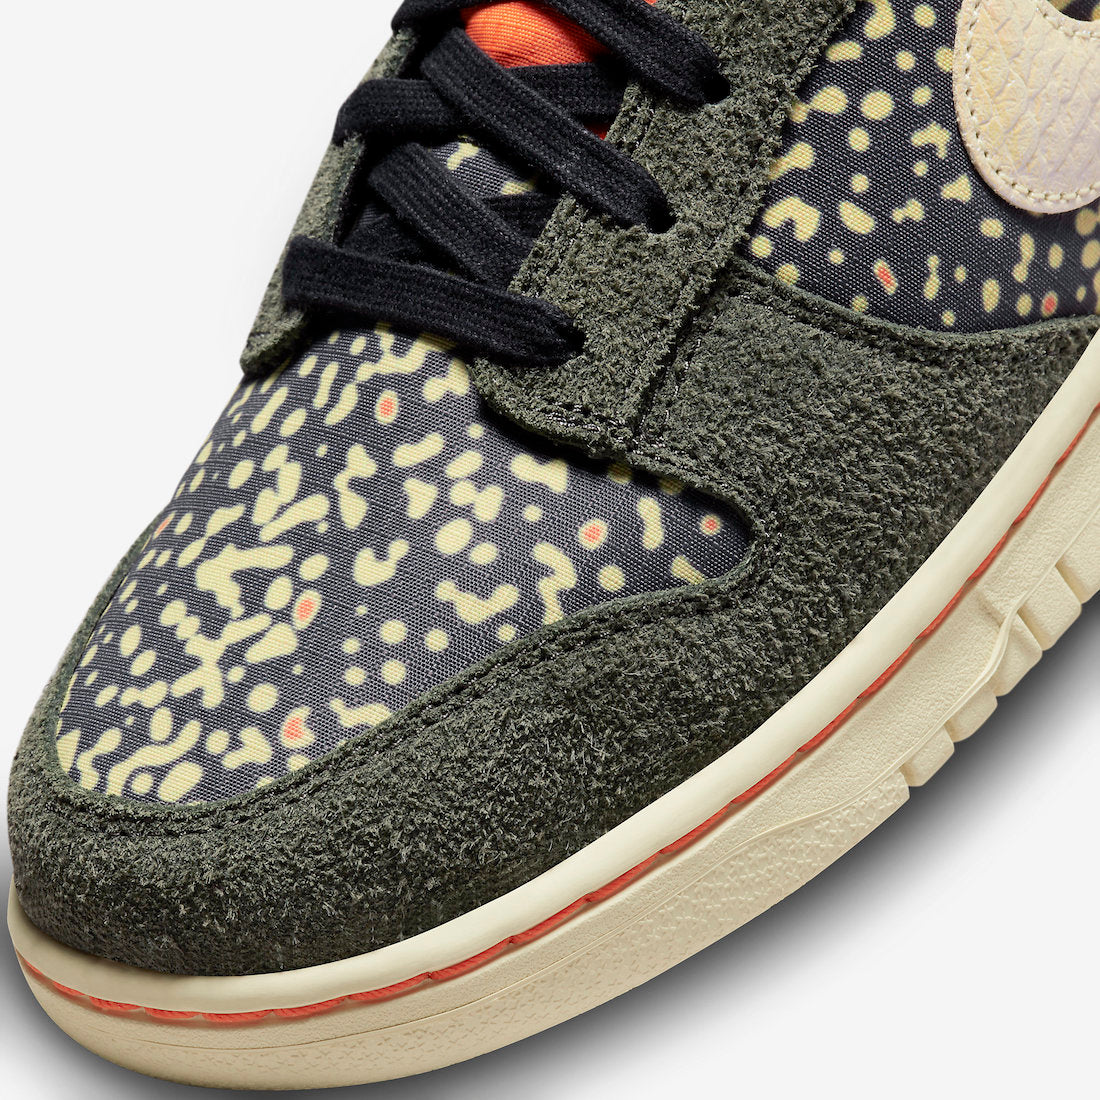 Nike Dunk Low “Rainbow Trout”